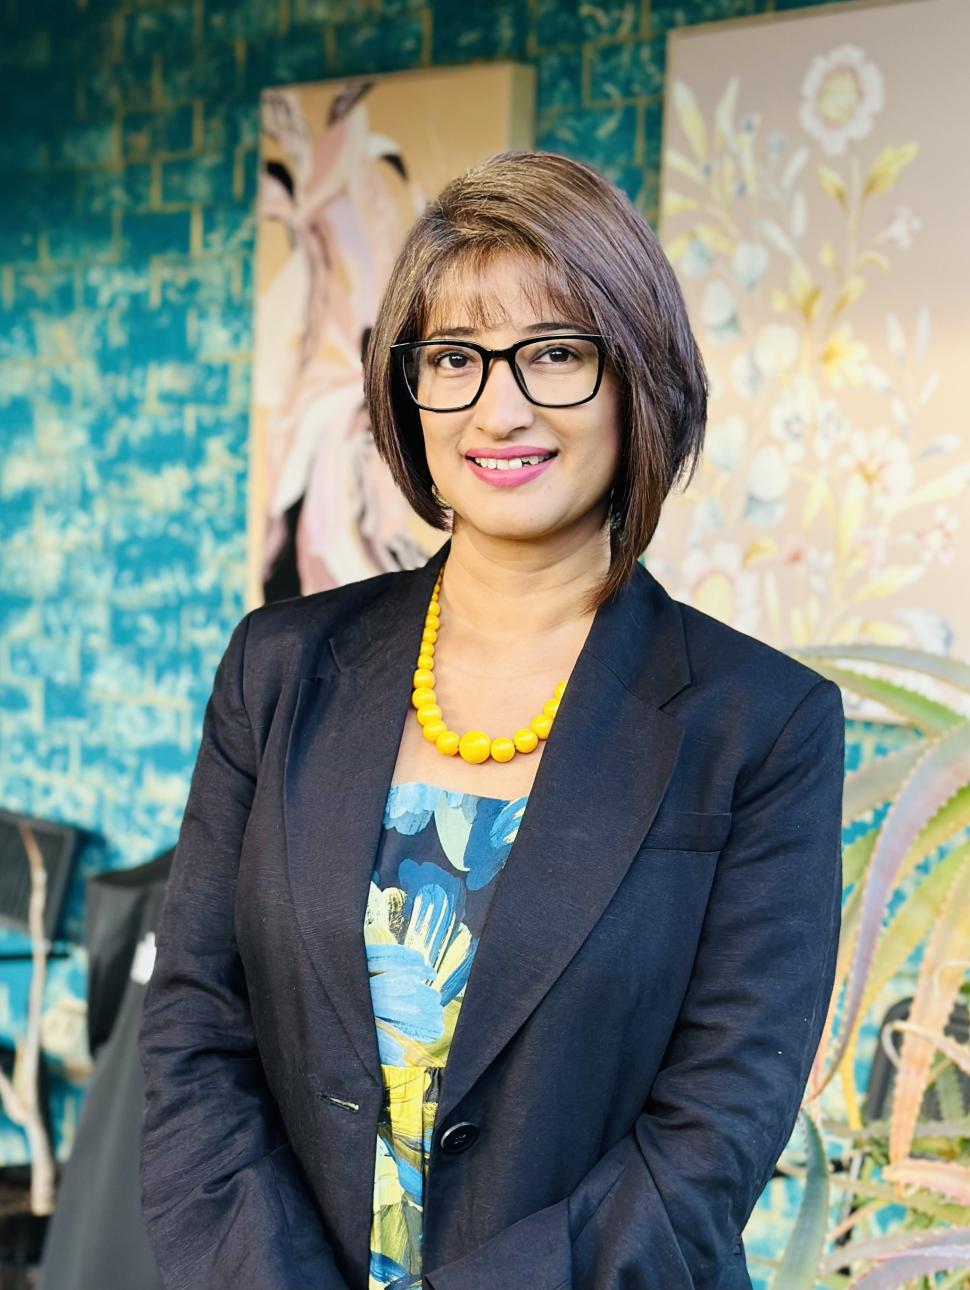 Dr Parwinder Kaur stands against a blue and peach backdrop with flower motifs and a large plant behind her. She has short dark brown hair cut into a bob and wears black rimmed glasses. She is wearing a black suit jacket over a floral printed shirt that matches the backdrop and a chunky yellow necklace. She is looking at the camera a smiling slightly   